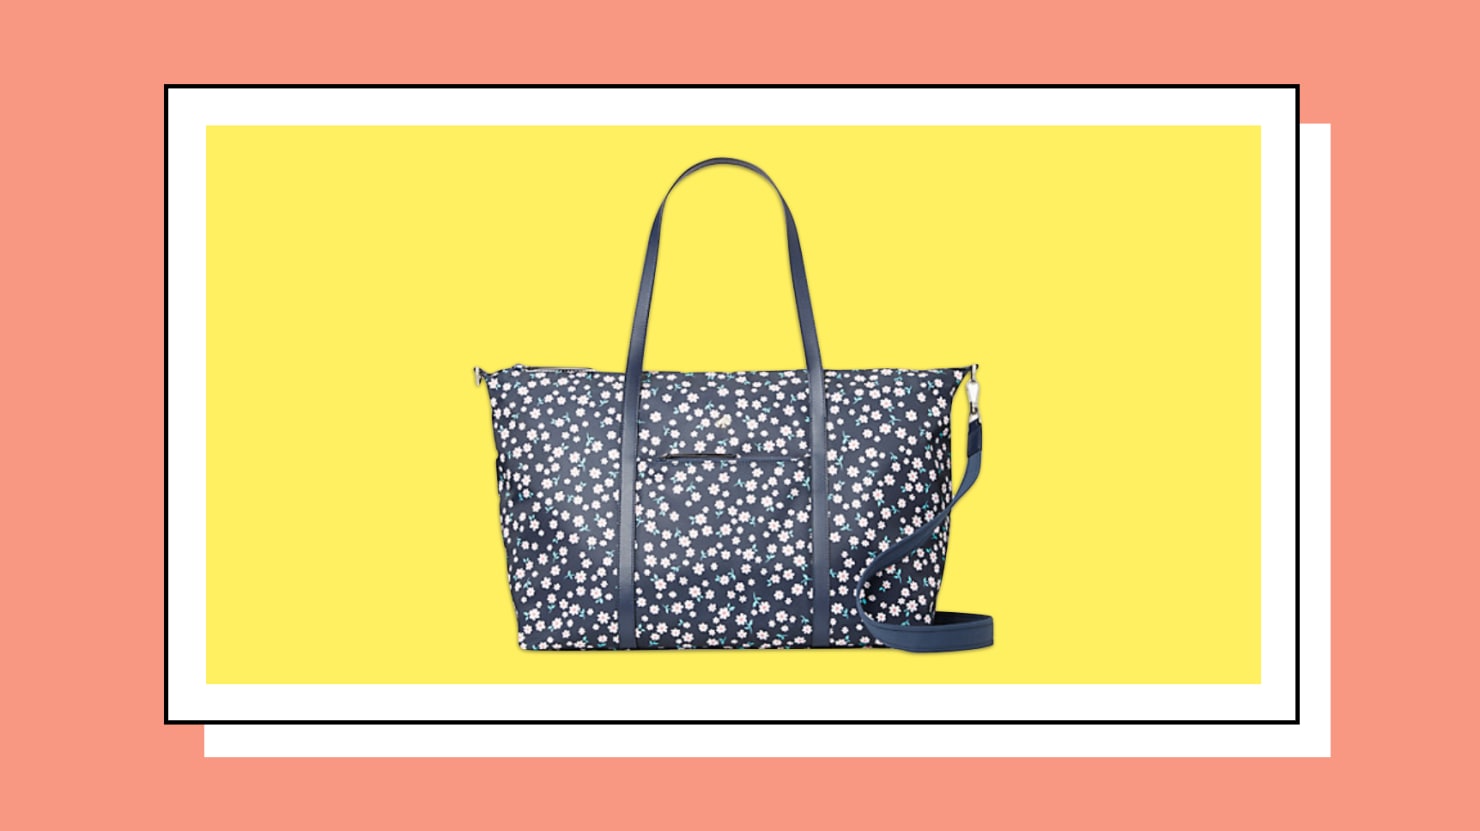 Snag one of these cute Kate Spade bags for only $69 before they're